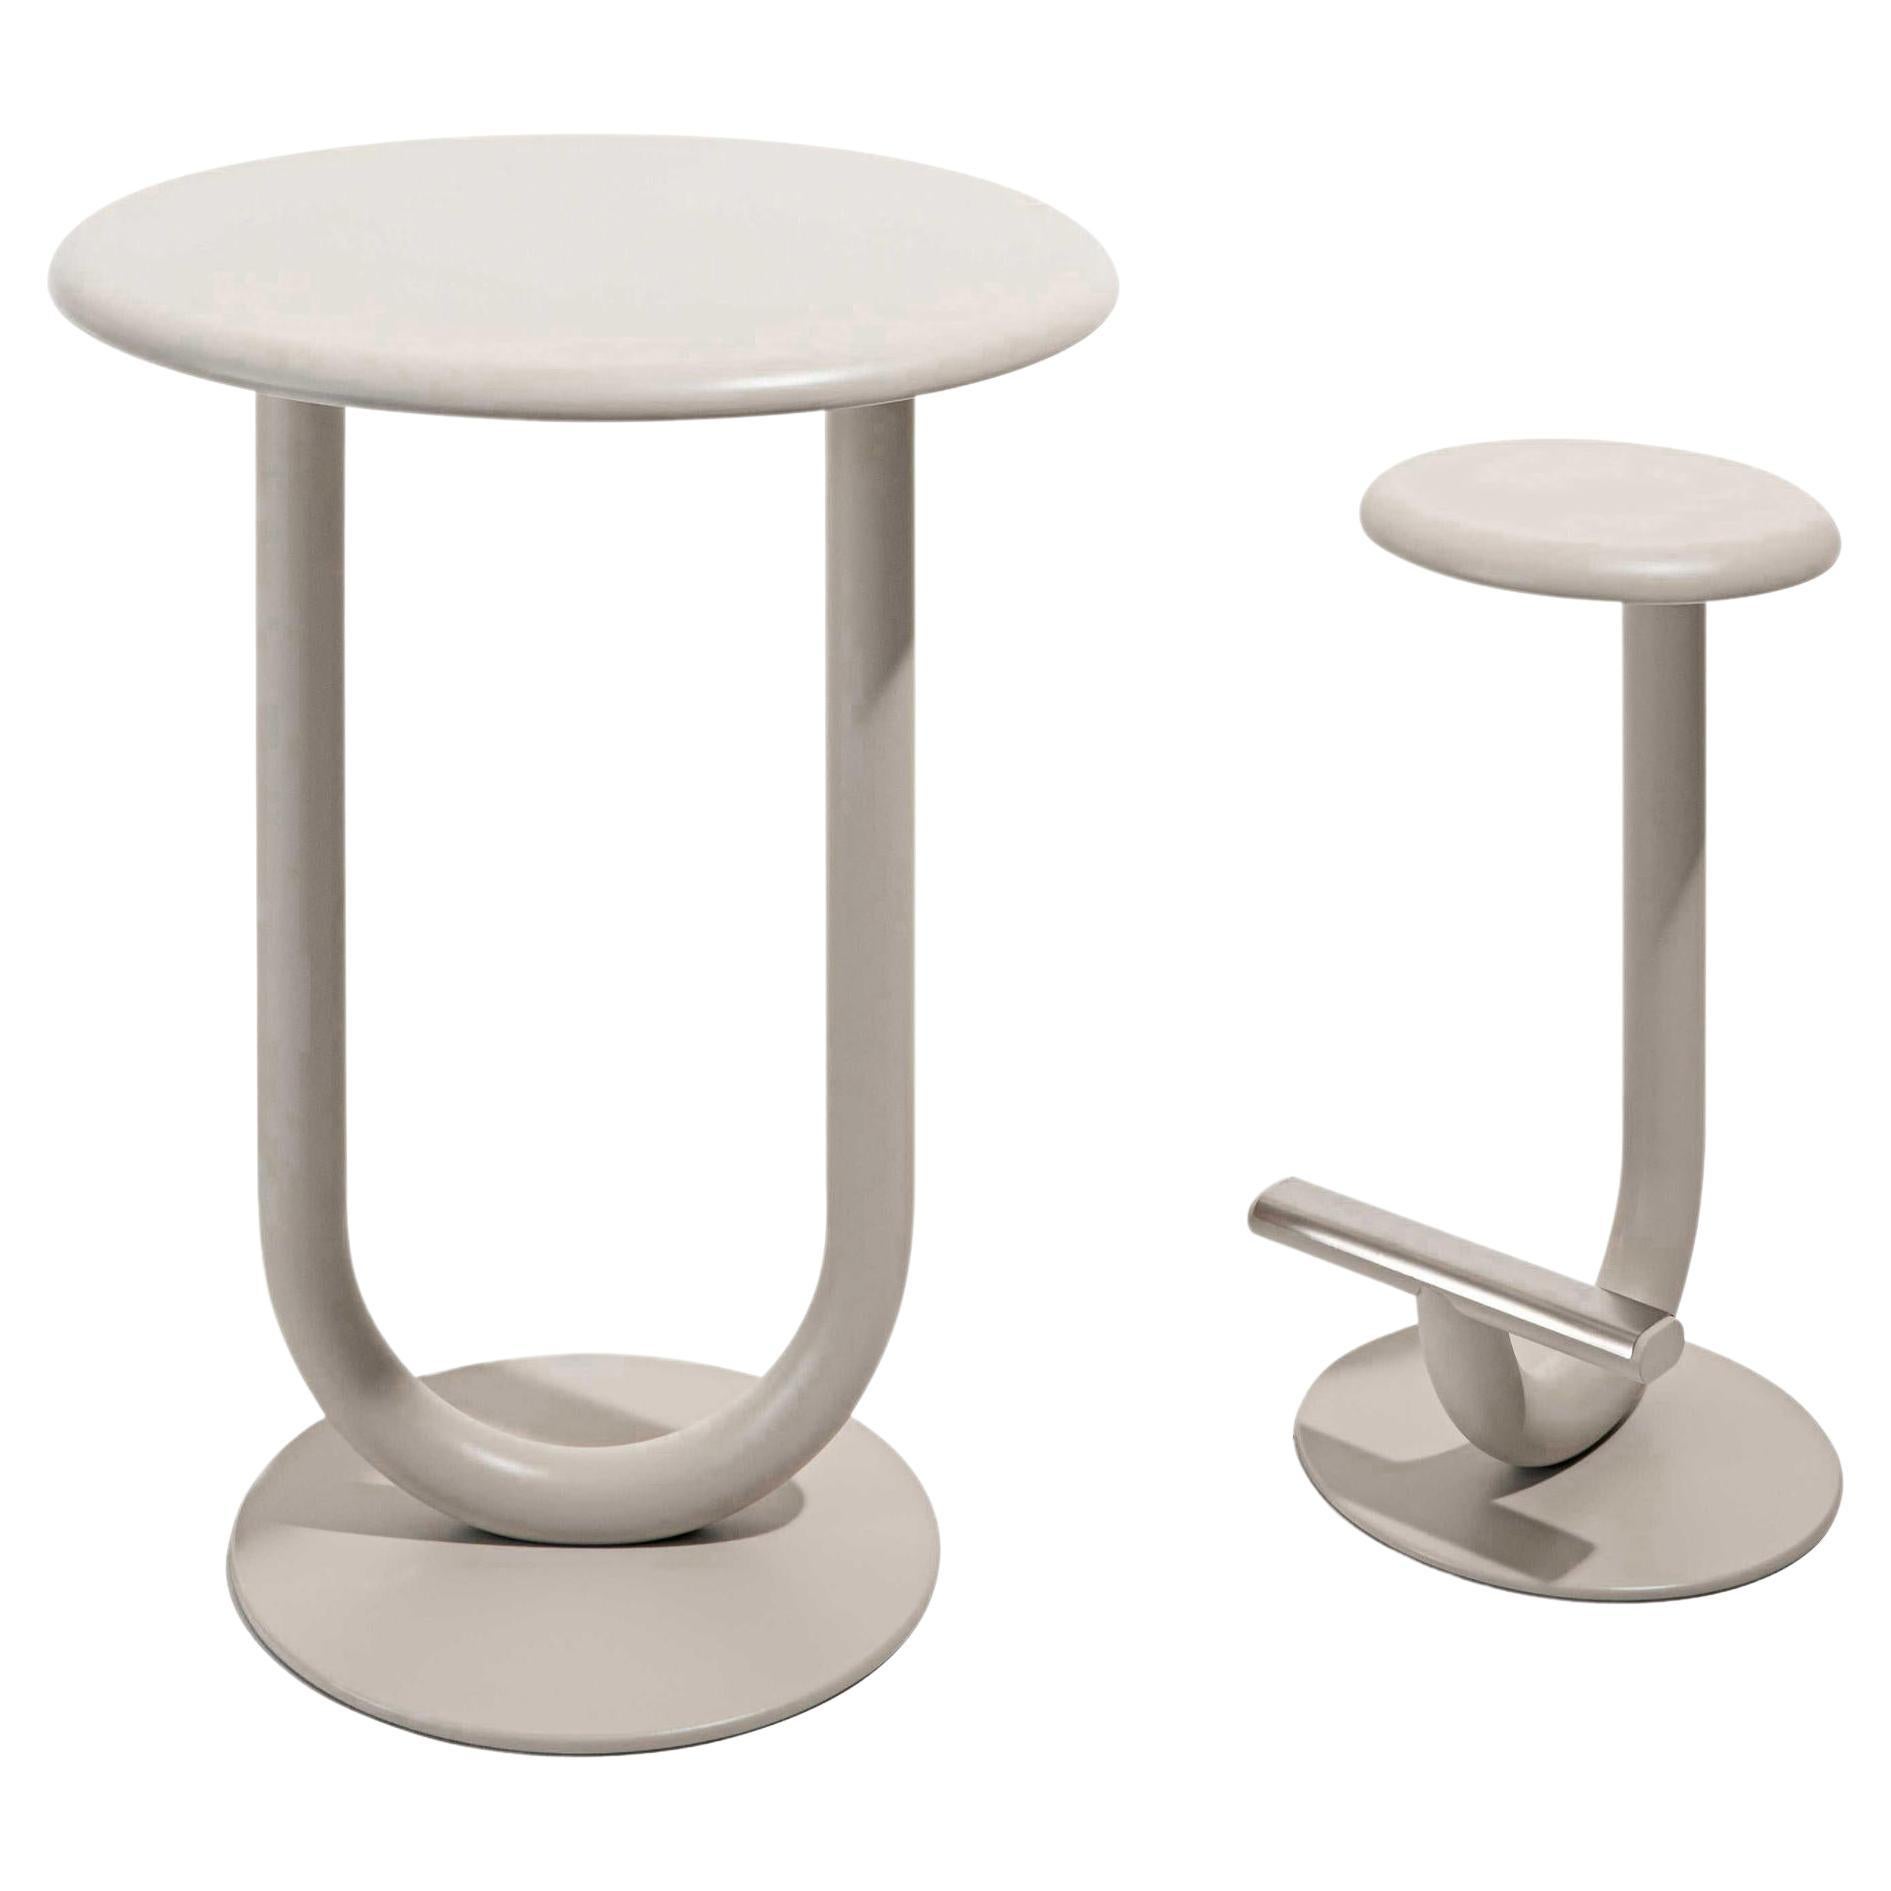 Customizable Desalto Strong Bar Table with Stool by Eugeni Quitllet